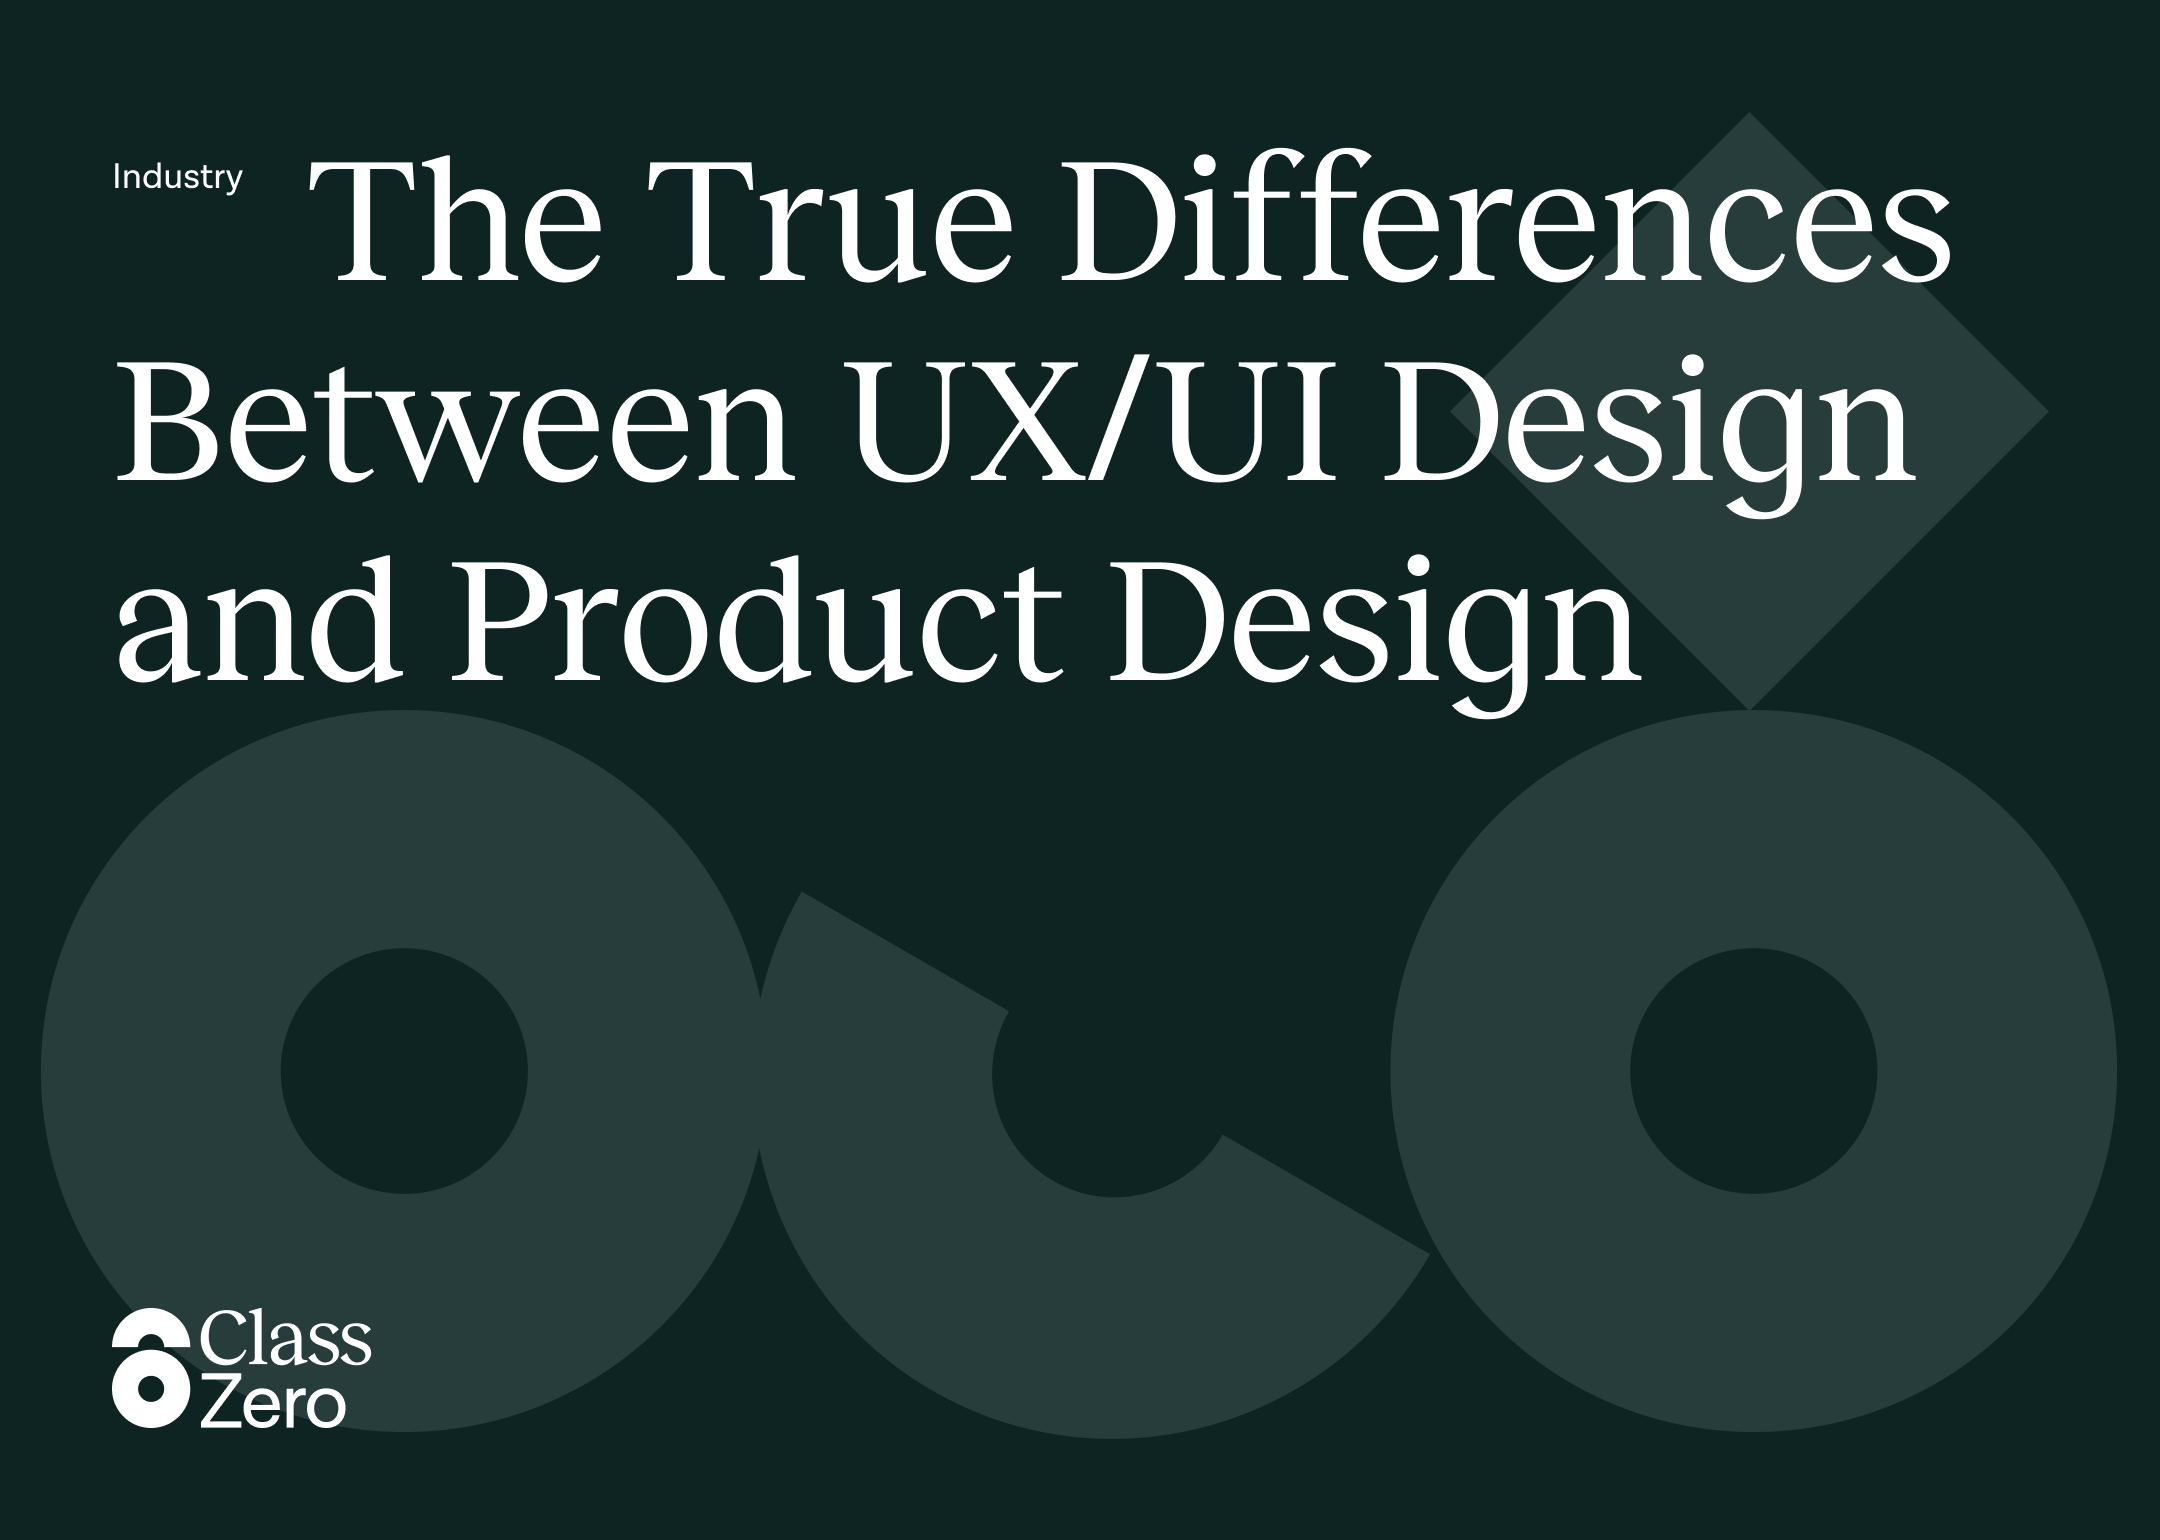 The True Differences Between UX/UI Design and Product Design